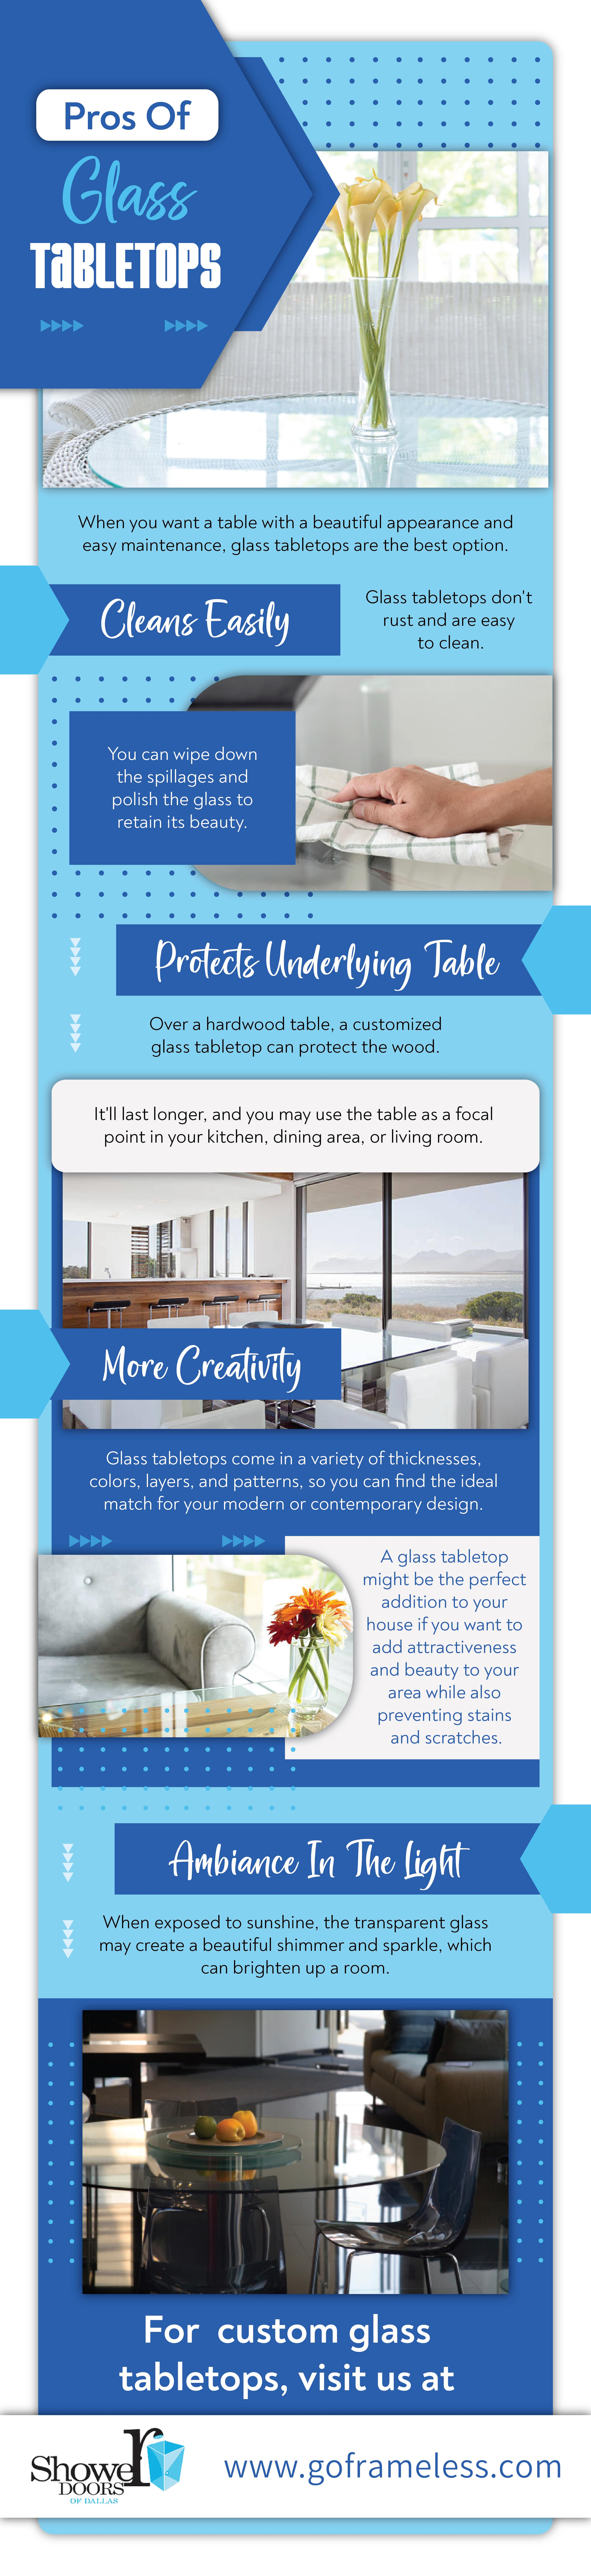 benefits of glass tabletops